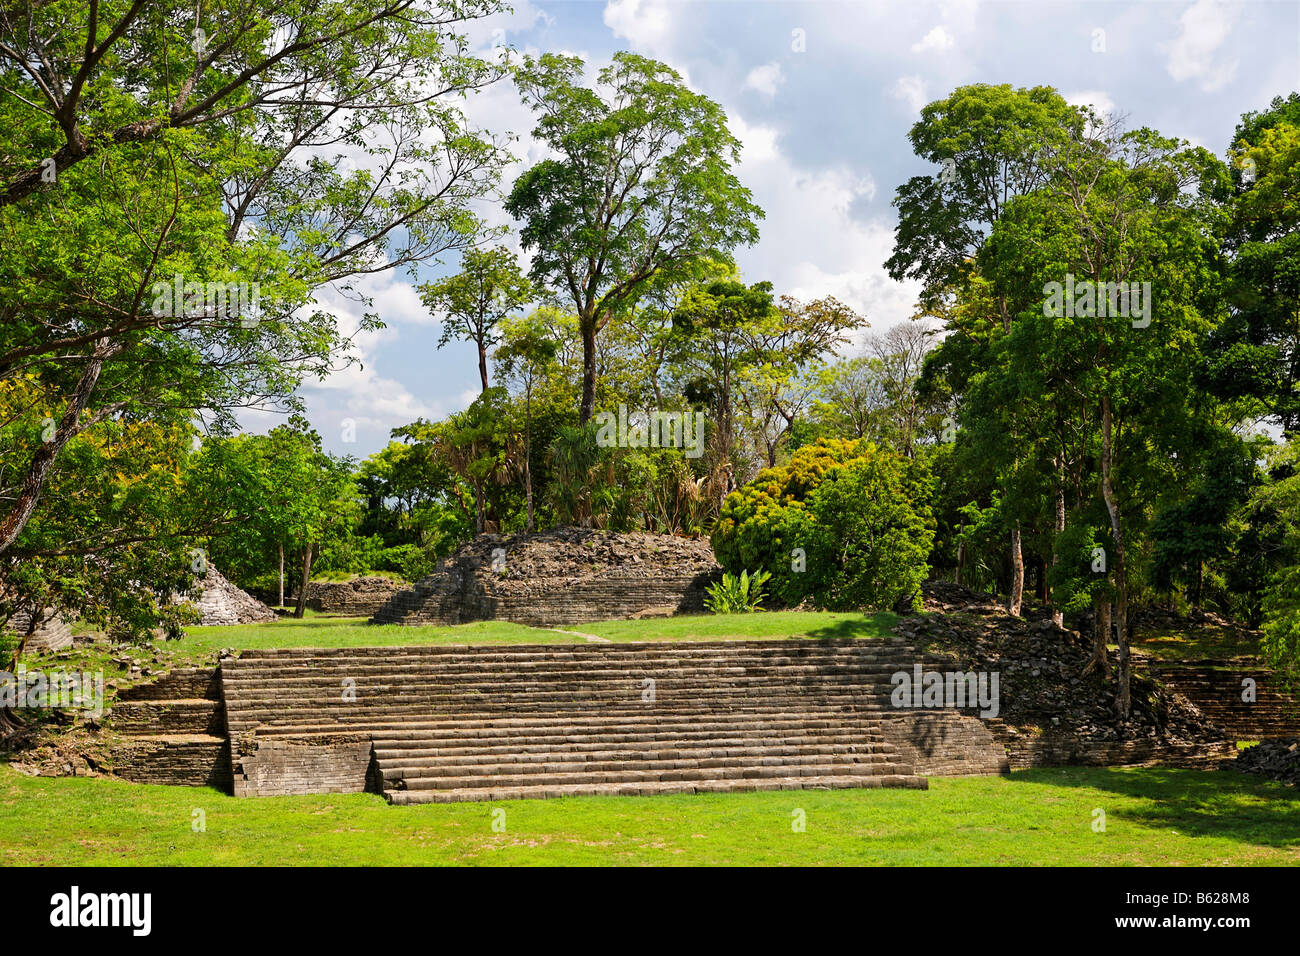 Lubaantun Mayan ruins, buildings without cement, Punta Gorda, Belize, Central America, Caribbean Stock Photo